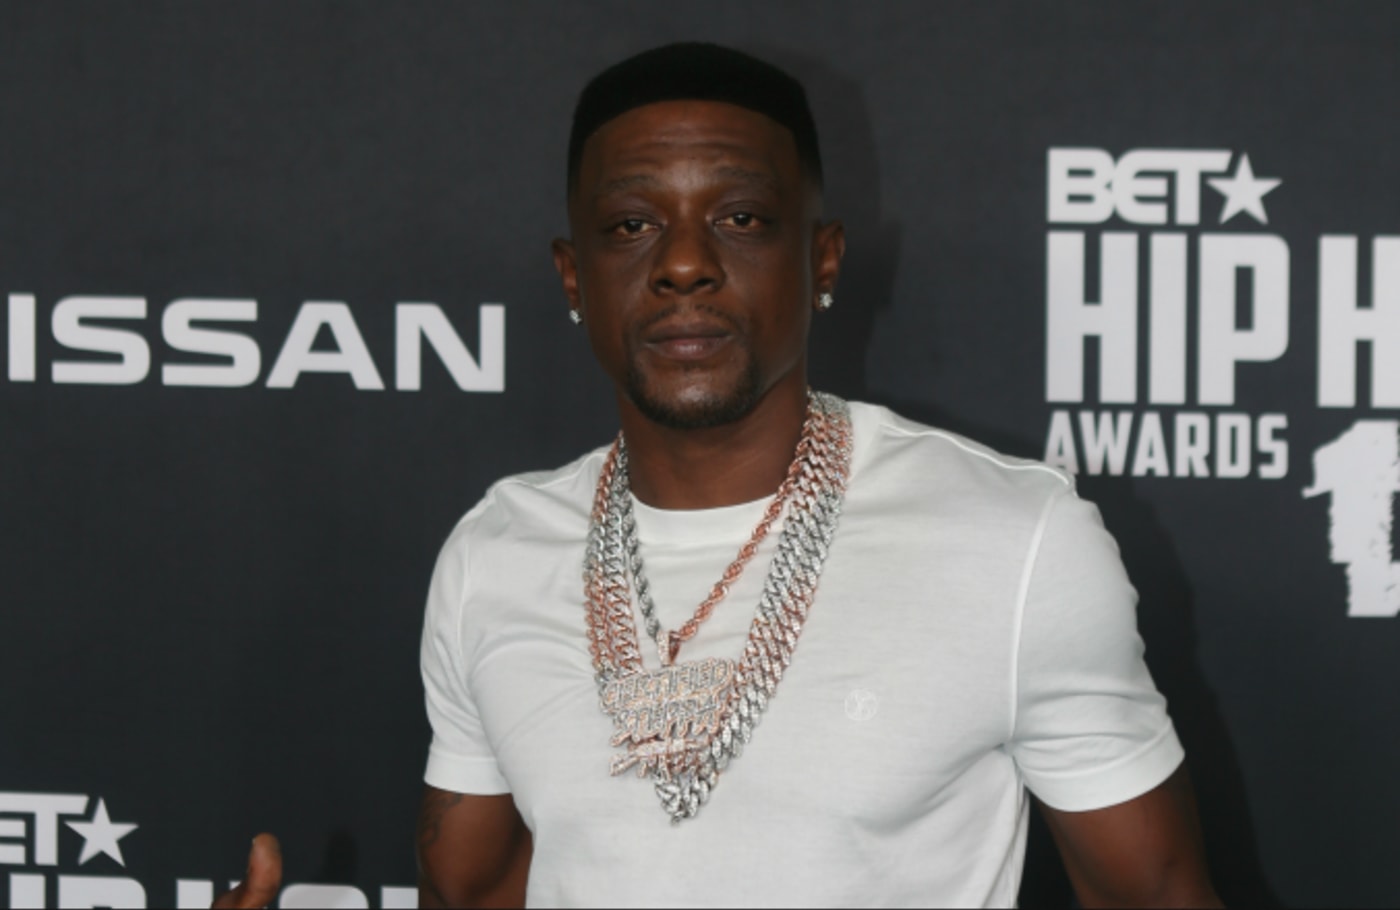 Boosie Badazz Responds to Claims That He Fought Zimmerman in a